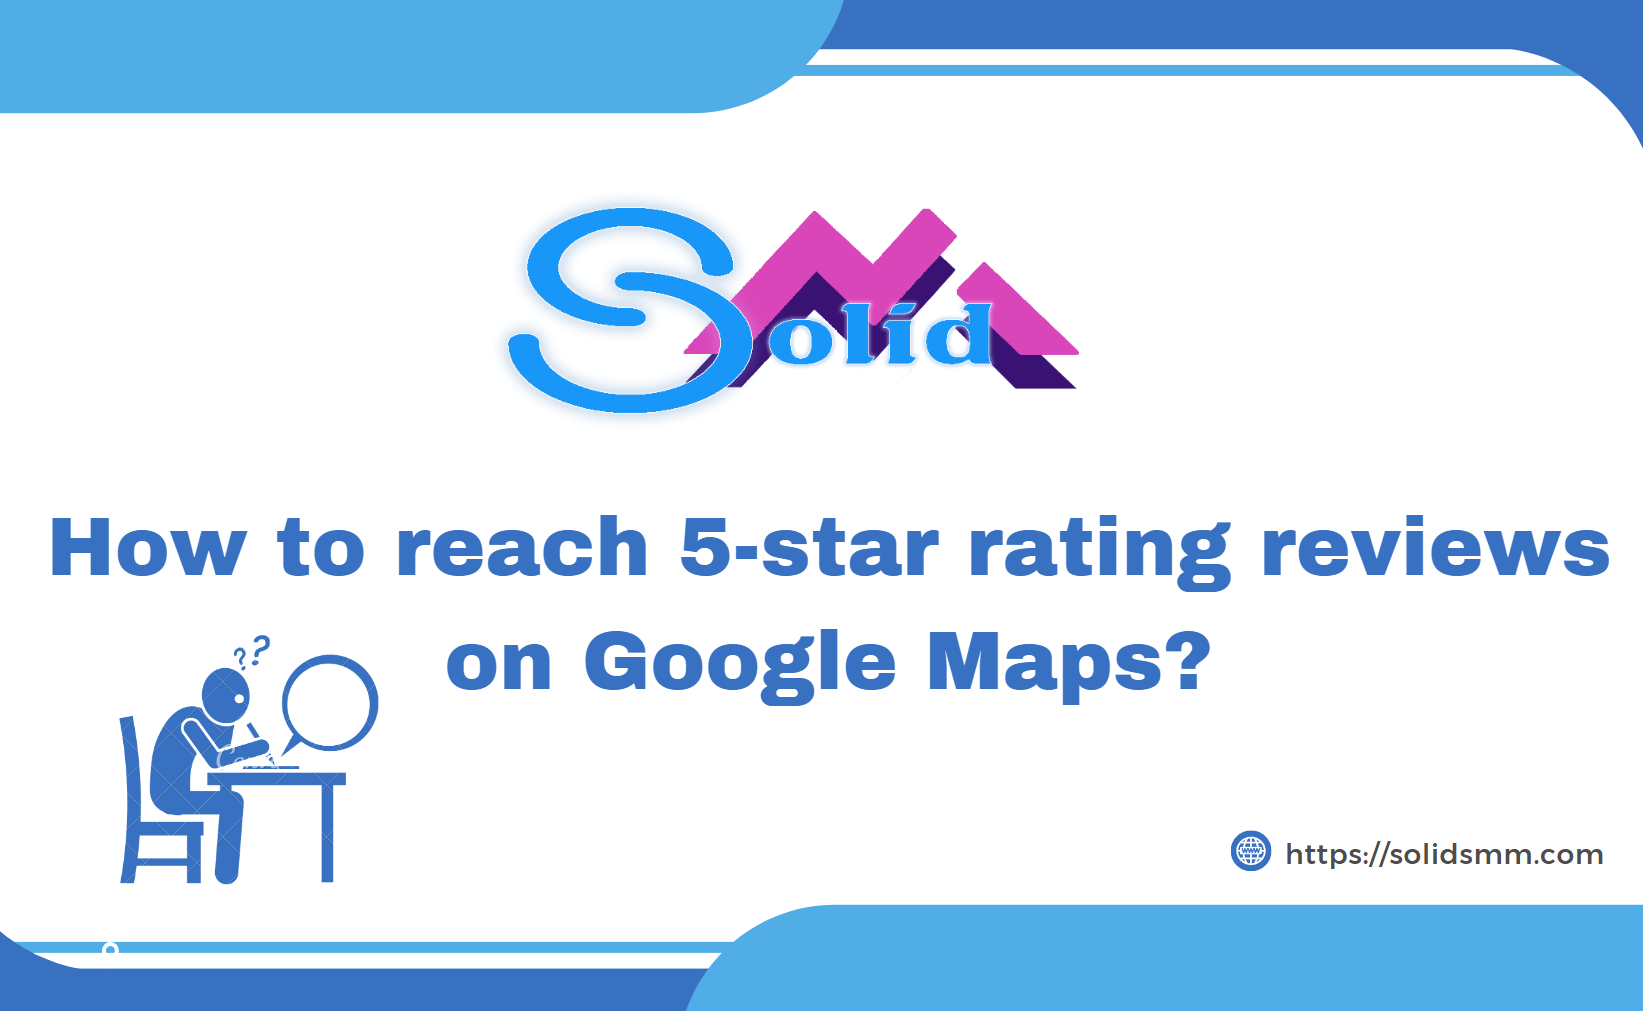 How to reach 5-star rating reviews on Google Maps?